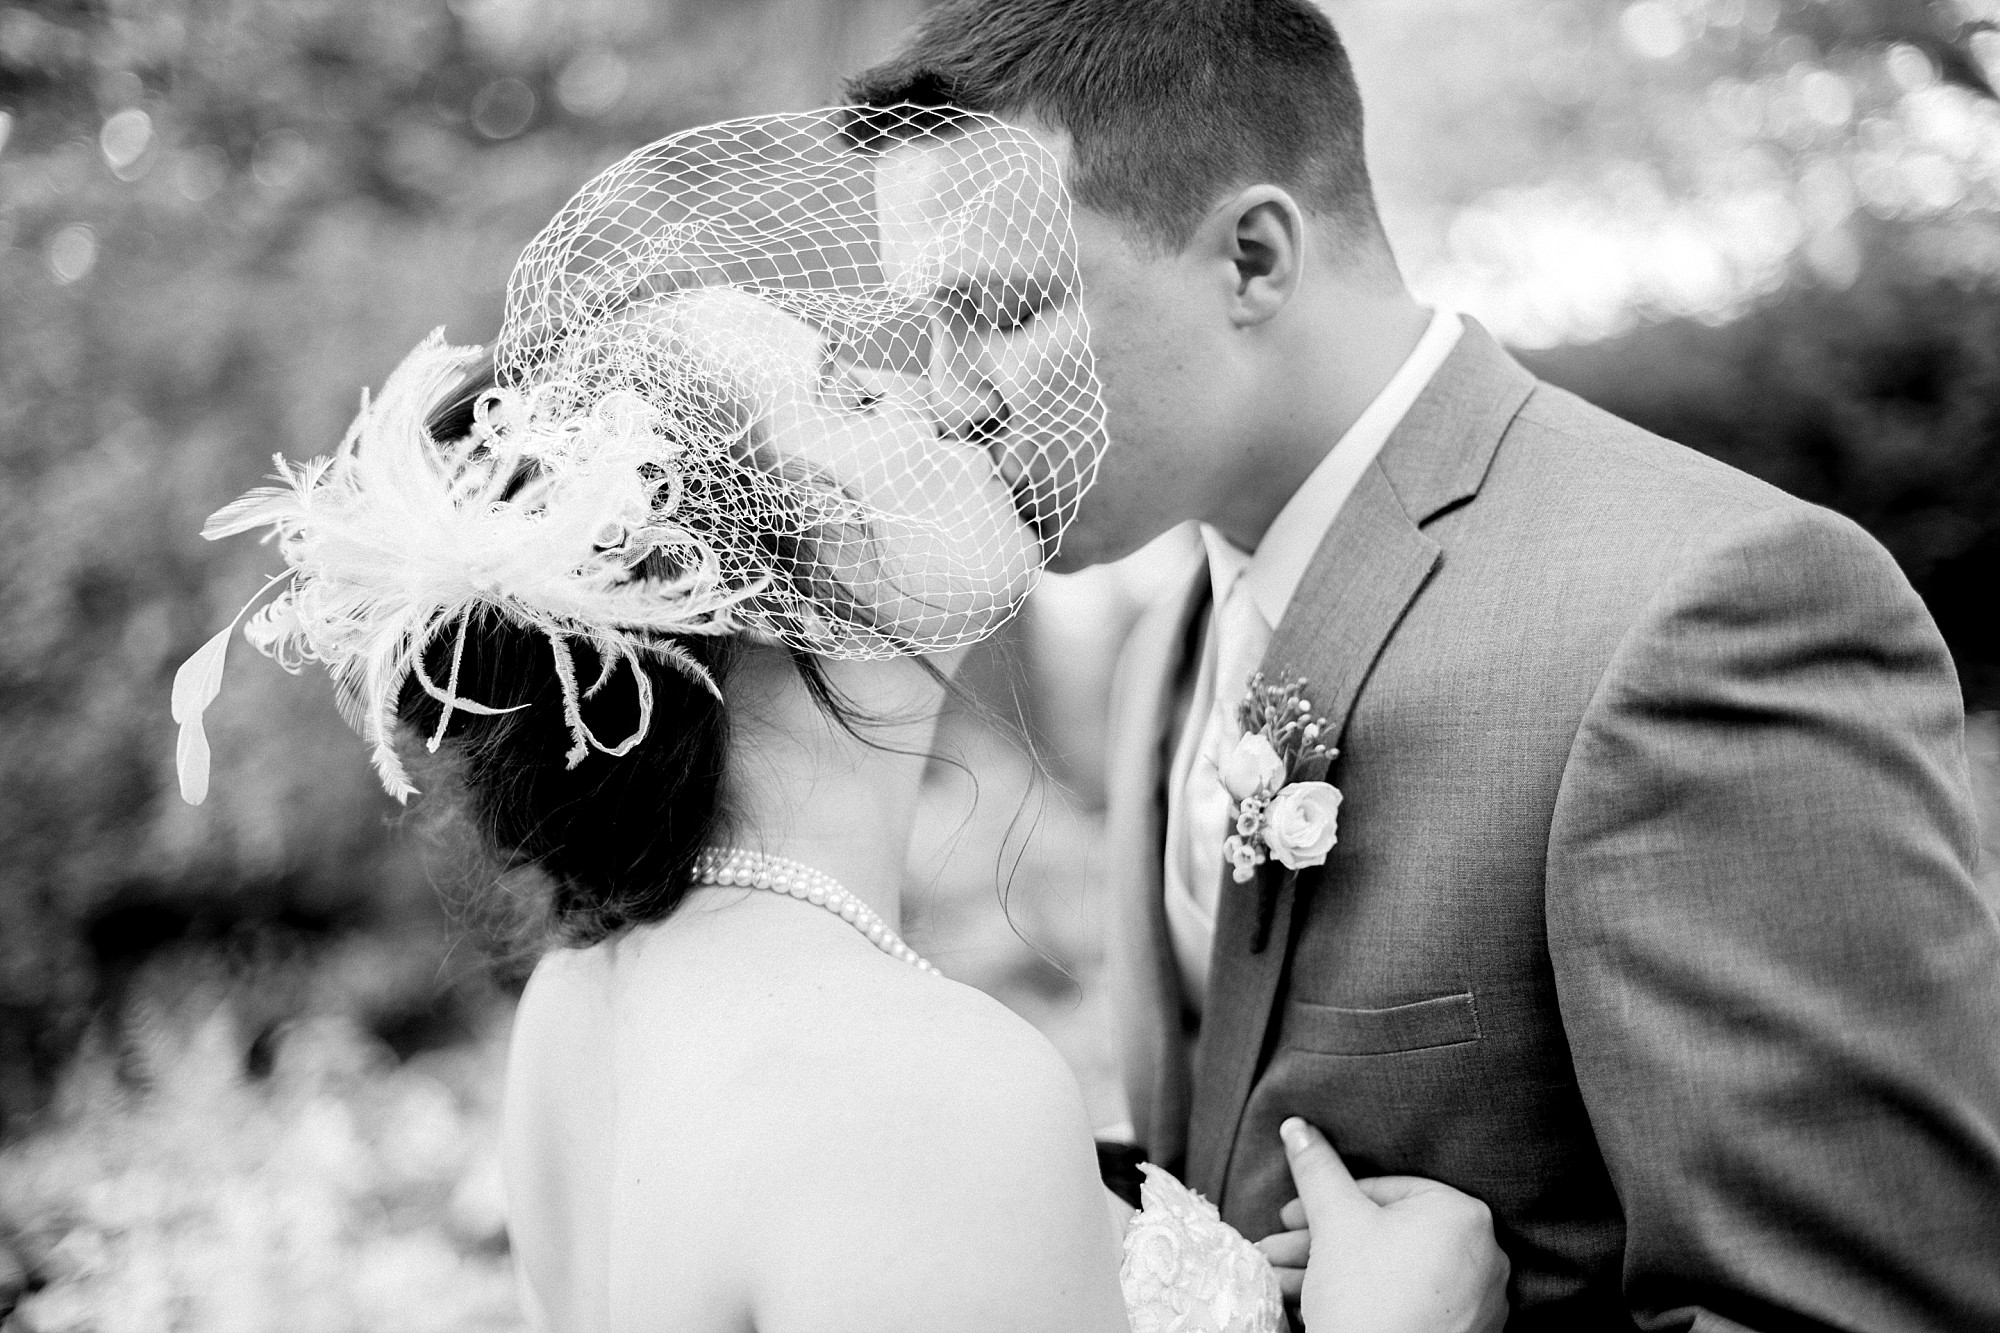 A summer garden wedding at Michigan State University in East Lansing, Michigan by Breanne Rochelle Photography. 